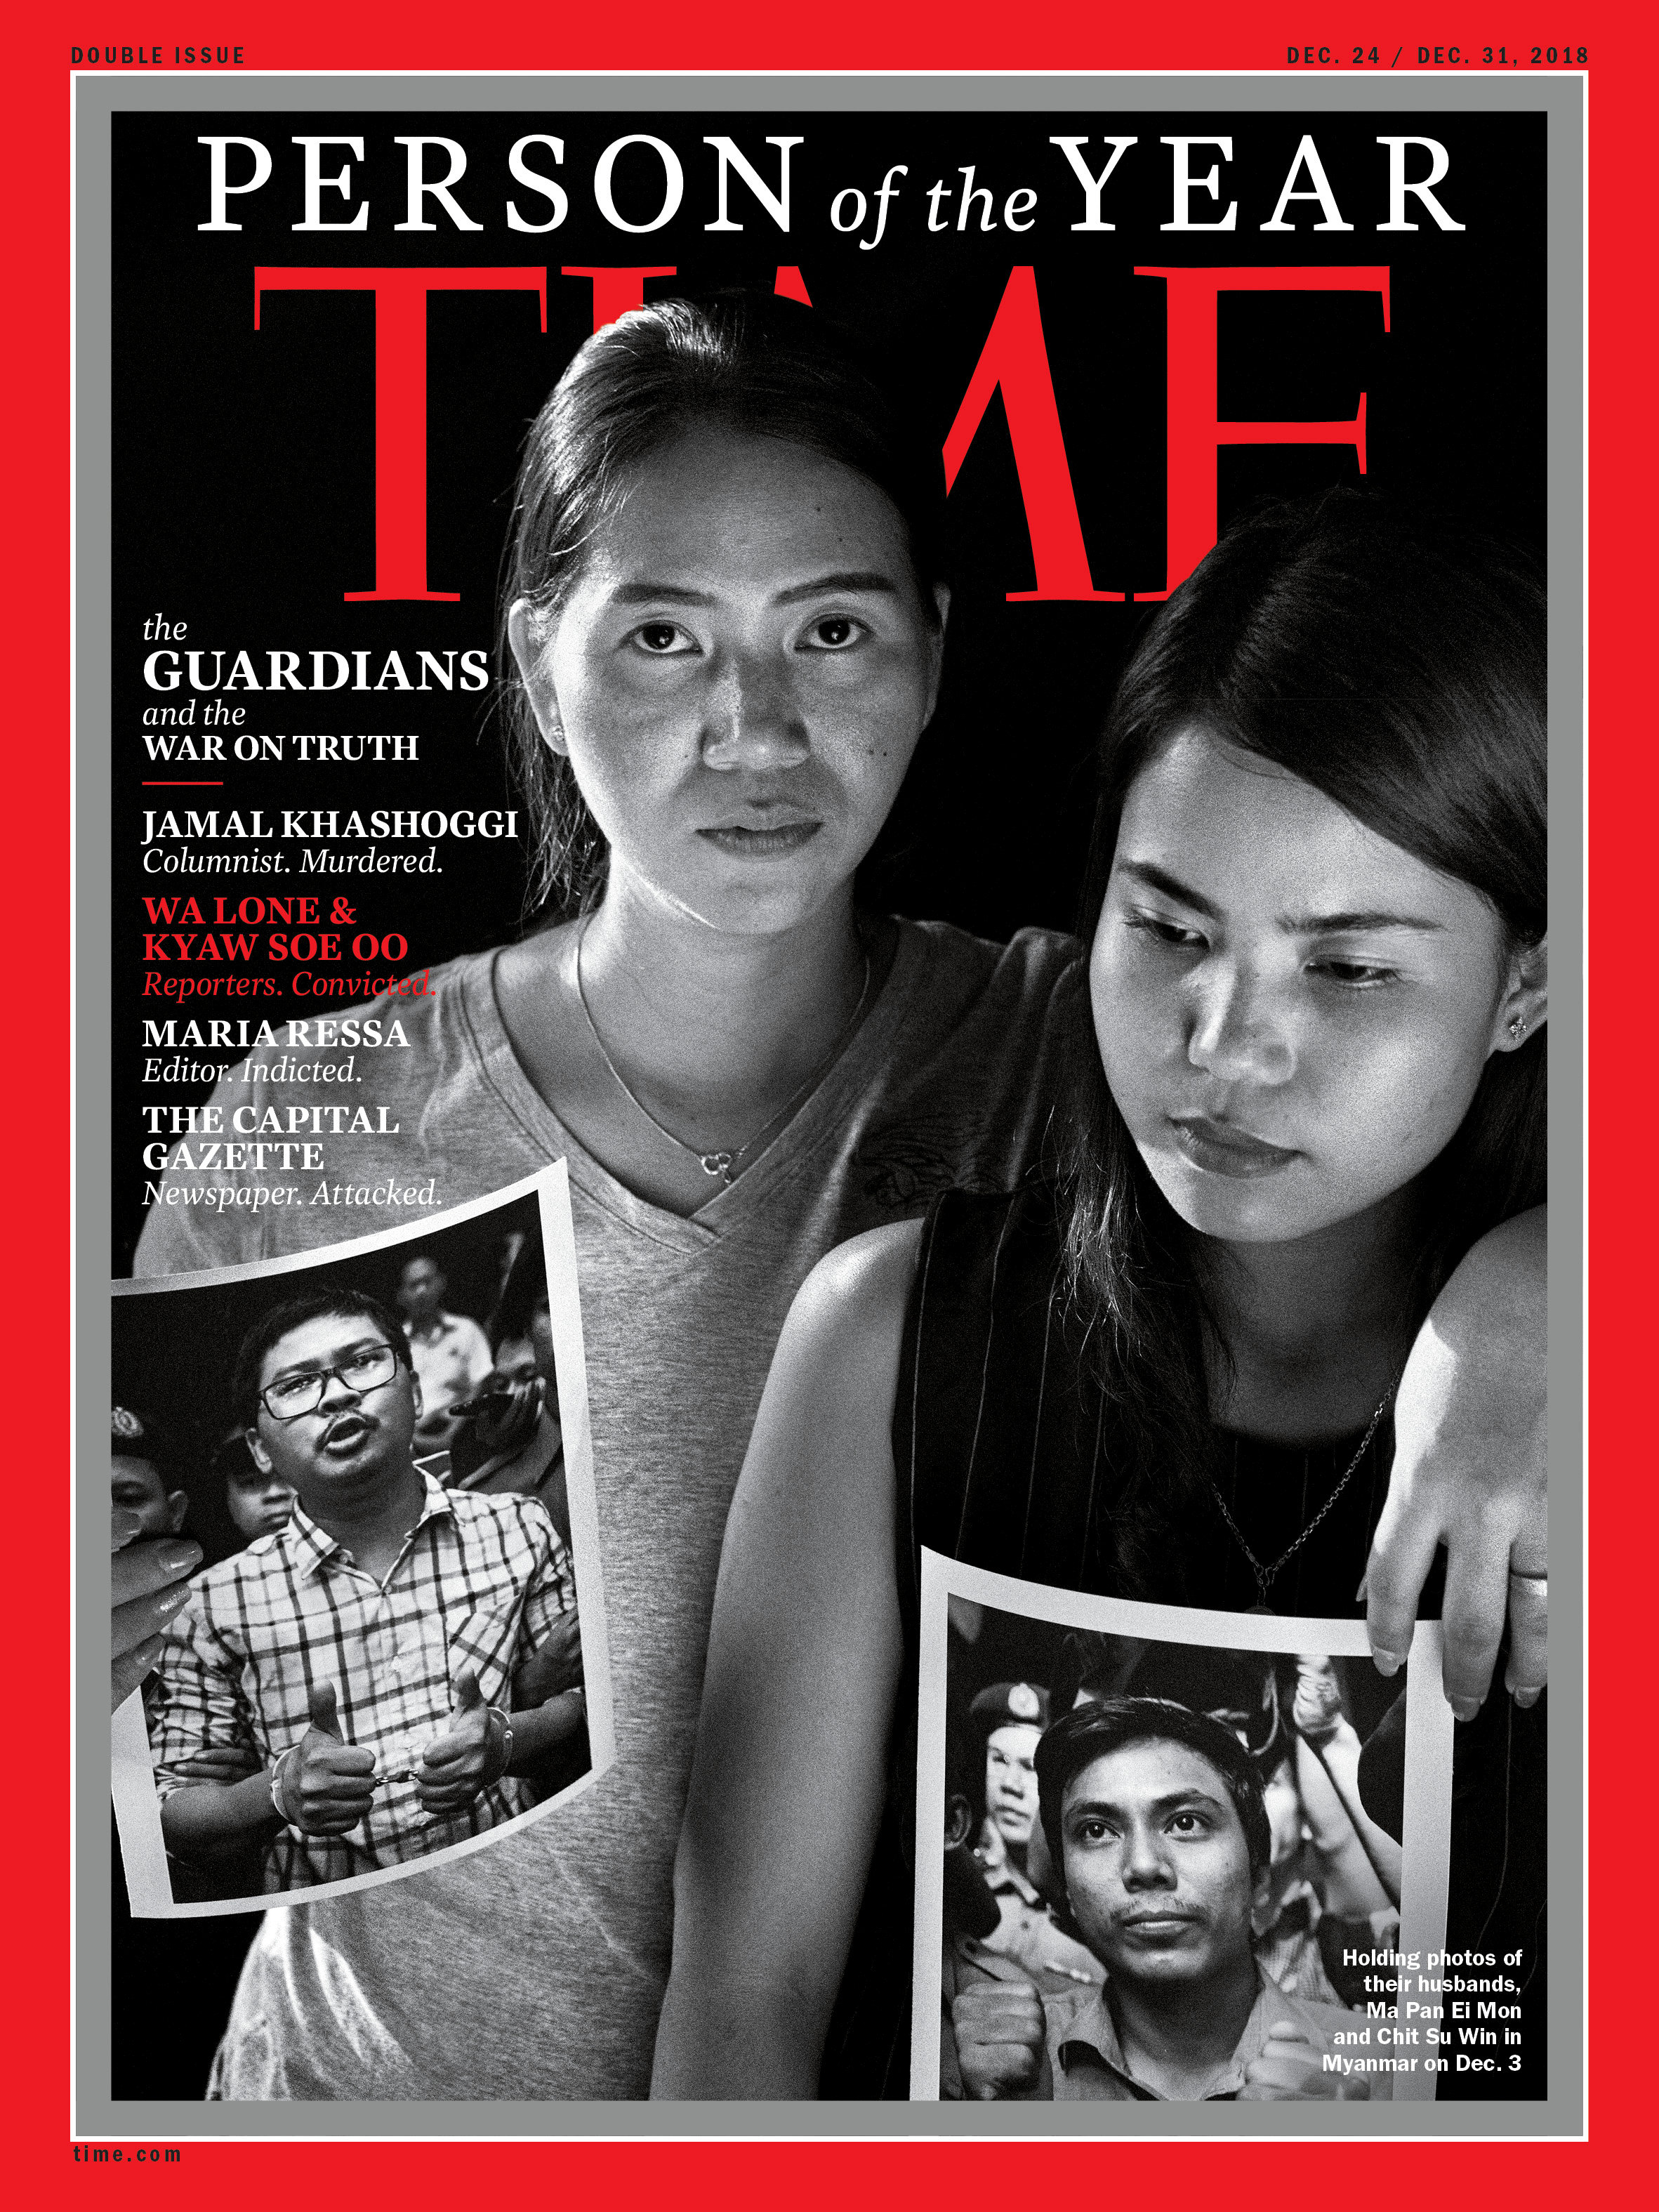 Ma Pan Ei Mon and Chit Su Win holding photos of their husbands - Wa Lone and Kyaw Soe Oo - who were among those recognised as Person of the Year 2018 by the Time Magazine [Courtesy: Time Magazine/Handout via Reuters]